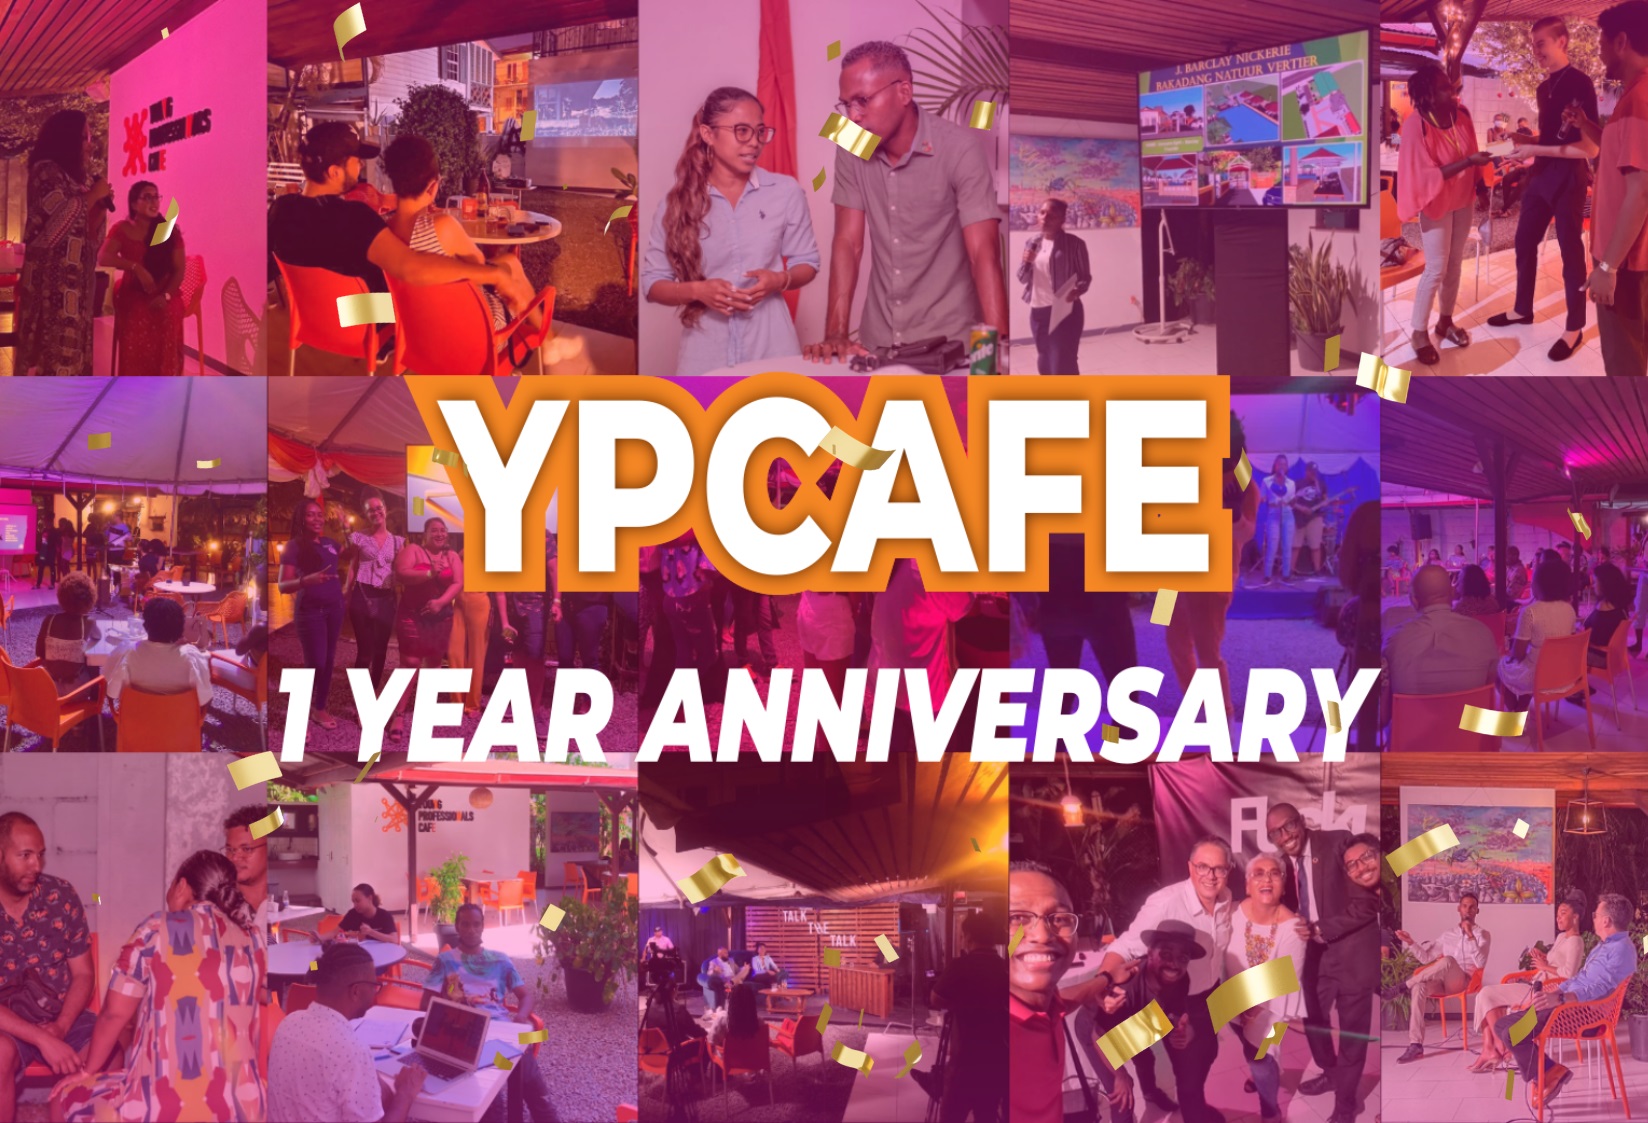 1 YeaR Anniversary Birthday Bash - FEATURED - Young Professionals Cafe